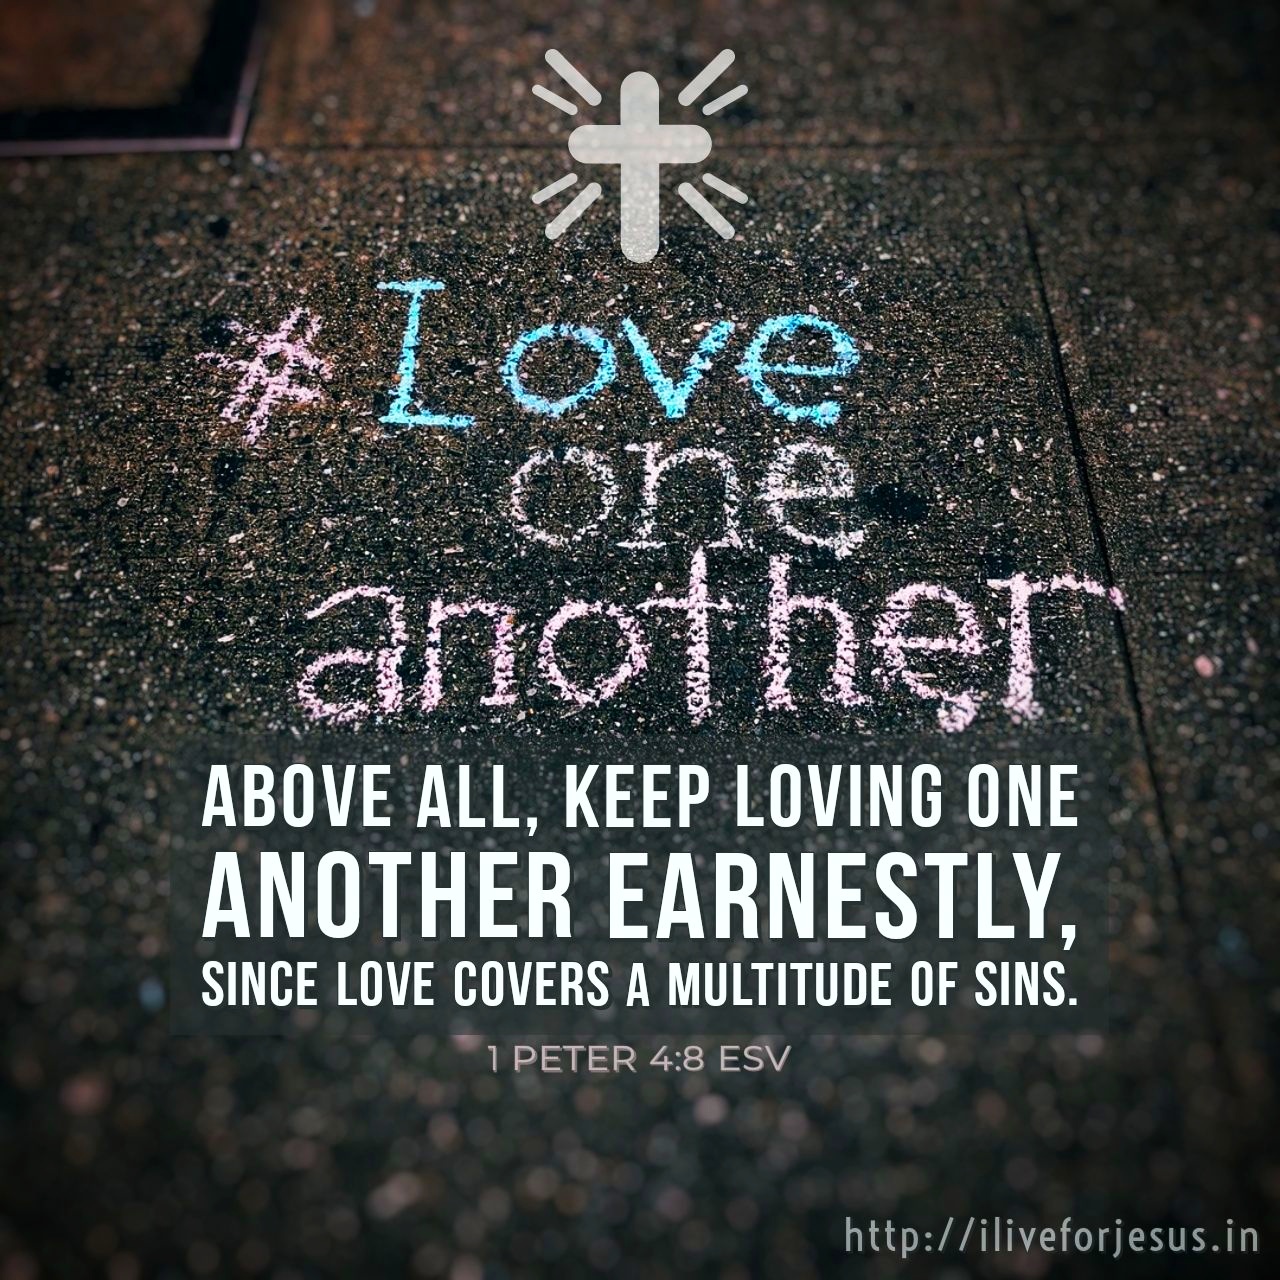 Above all, keep loving one another earnestly, since love covers a multitude of sins. 1 Peter 4:8 ESV